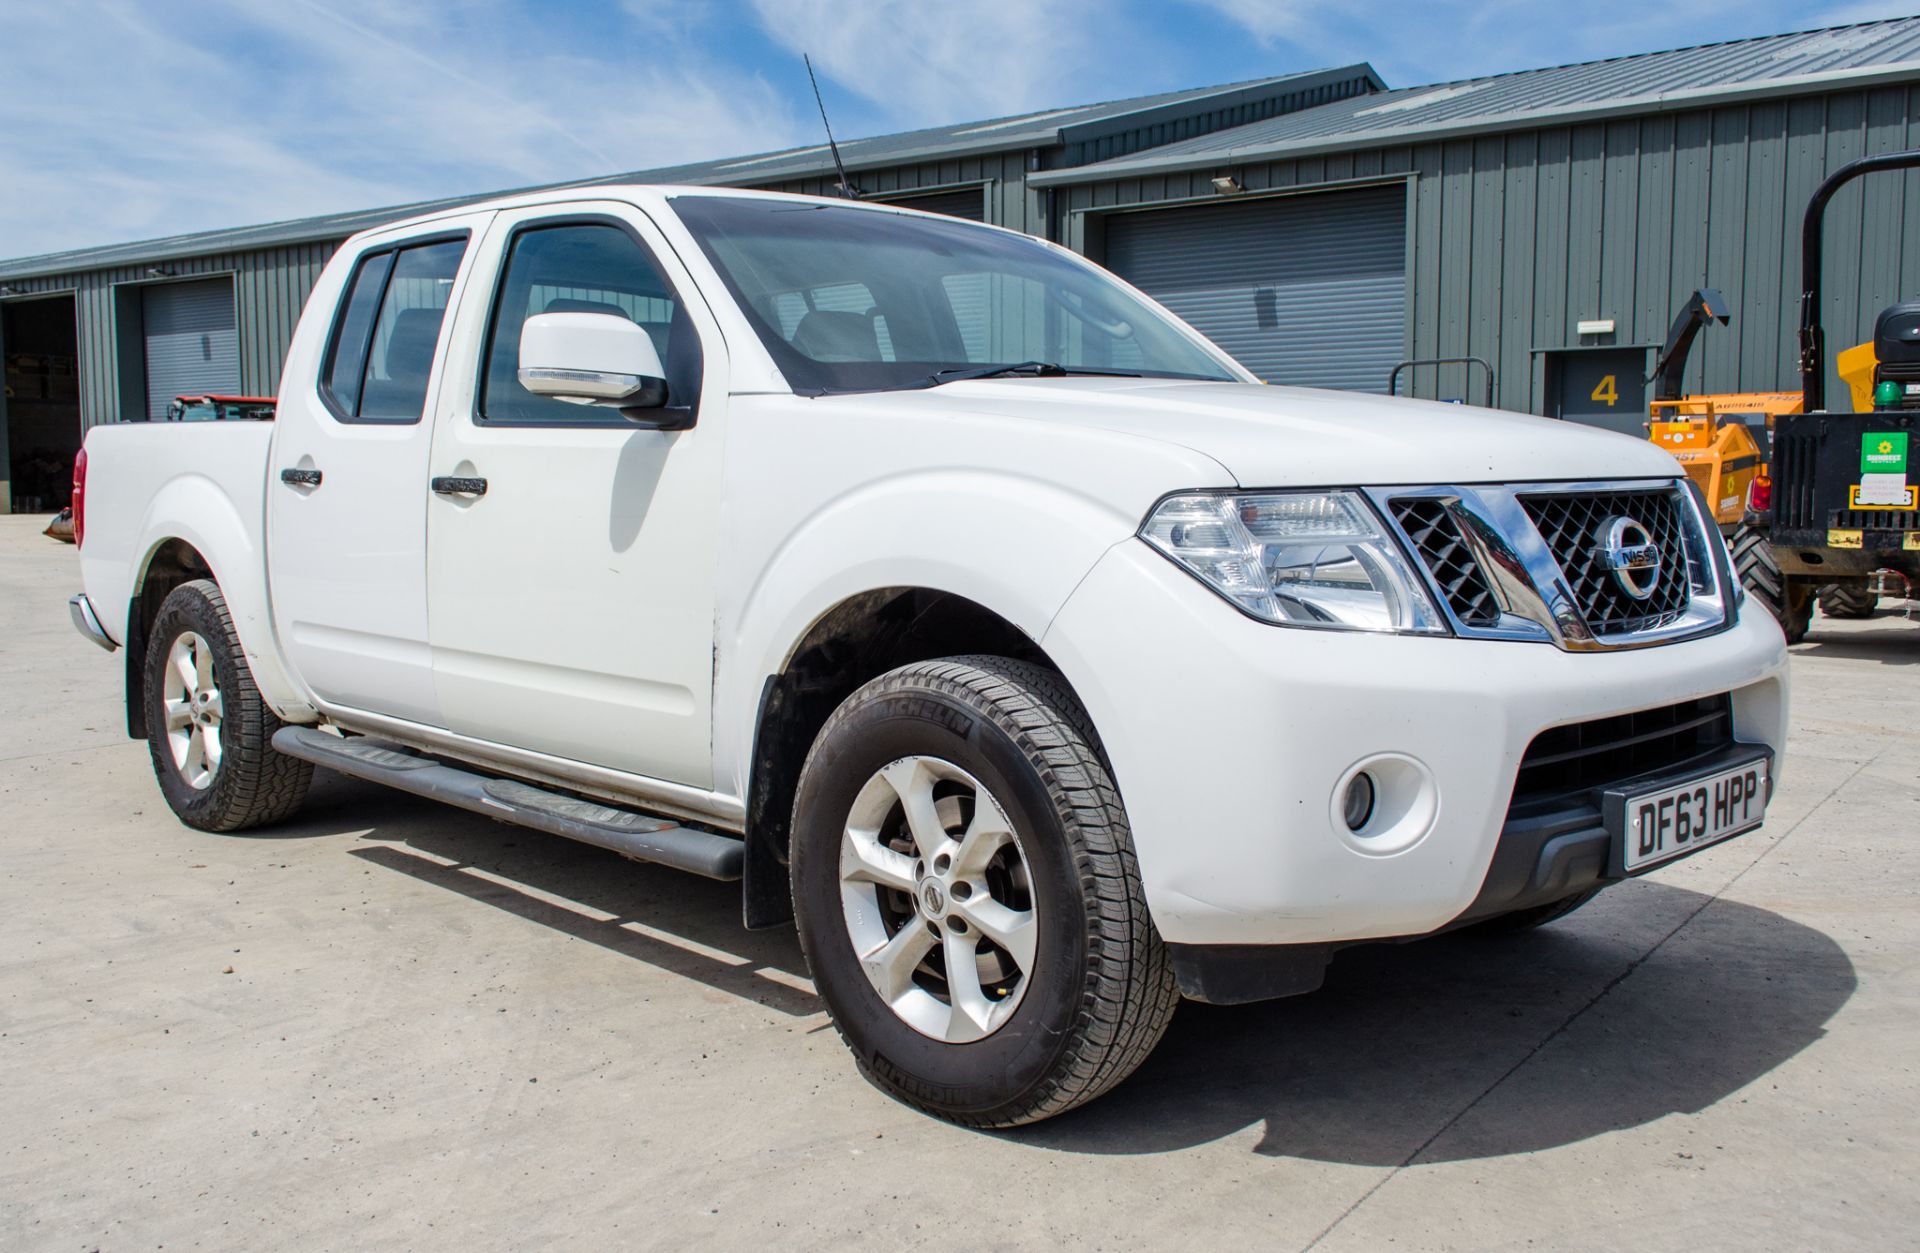 Nissan Navara Acenta DCI 6 speed manual double cab pick up Registration Number: DF63 HPP Date of - Image 2 of 31